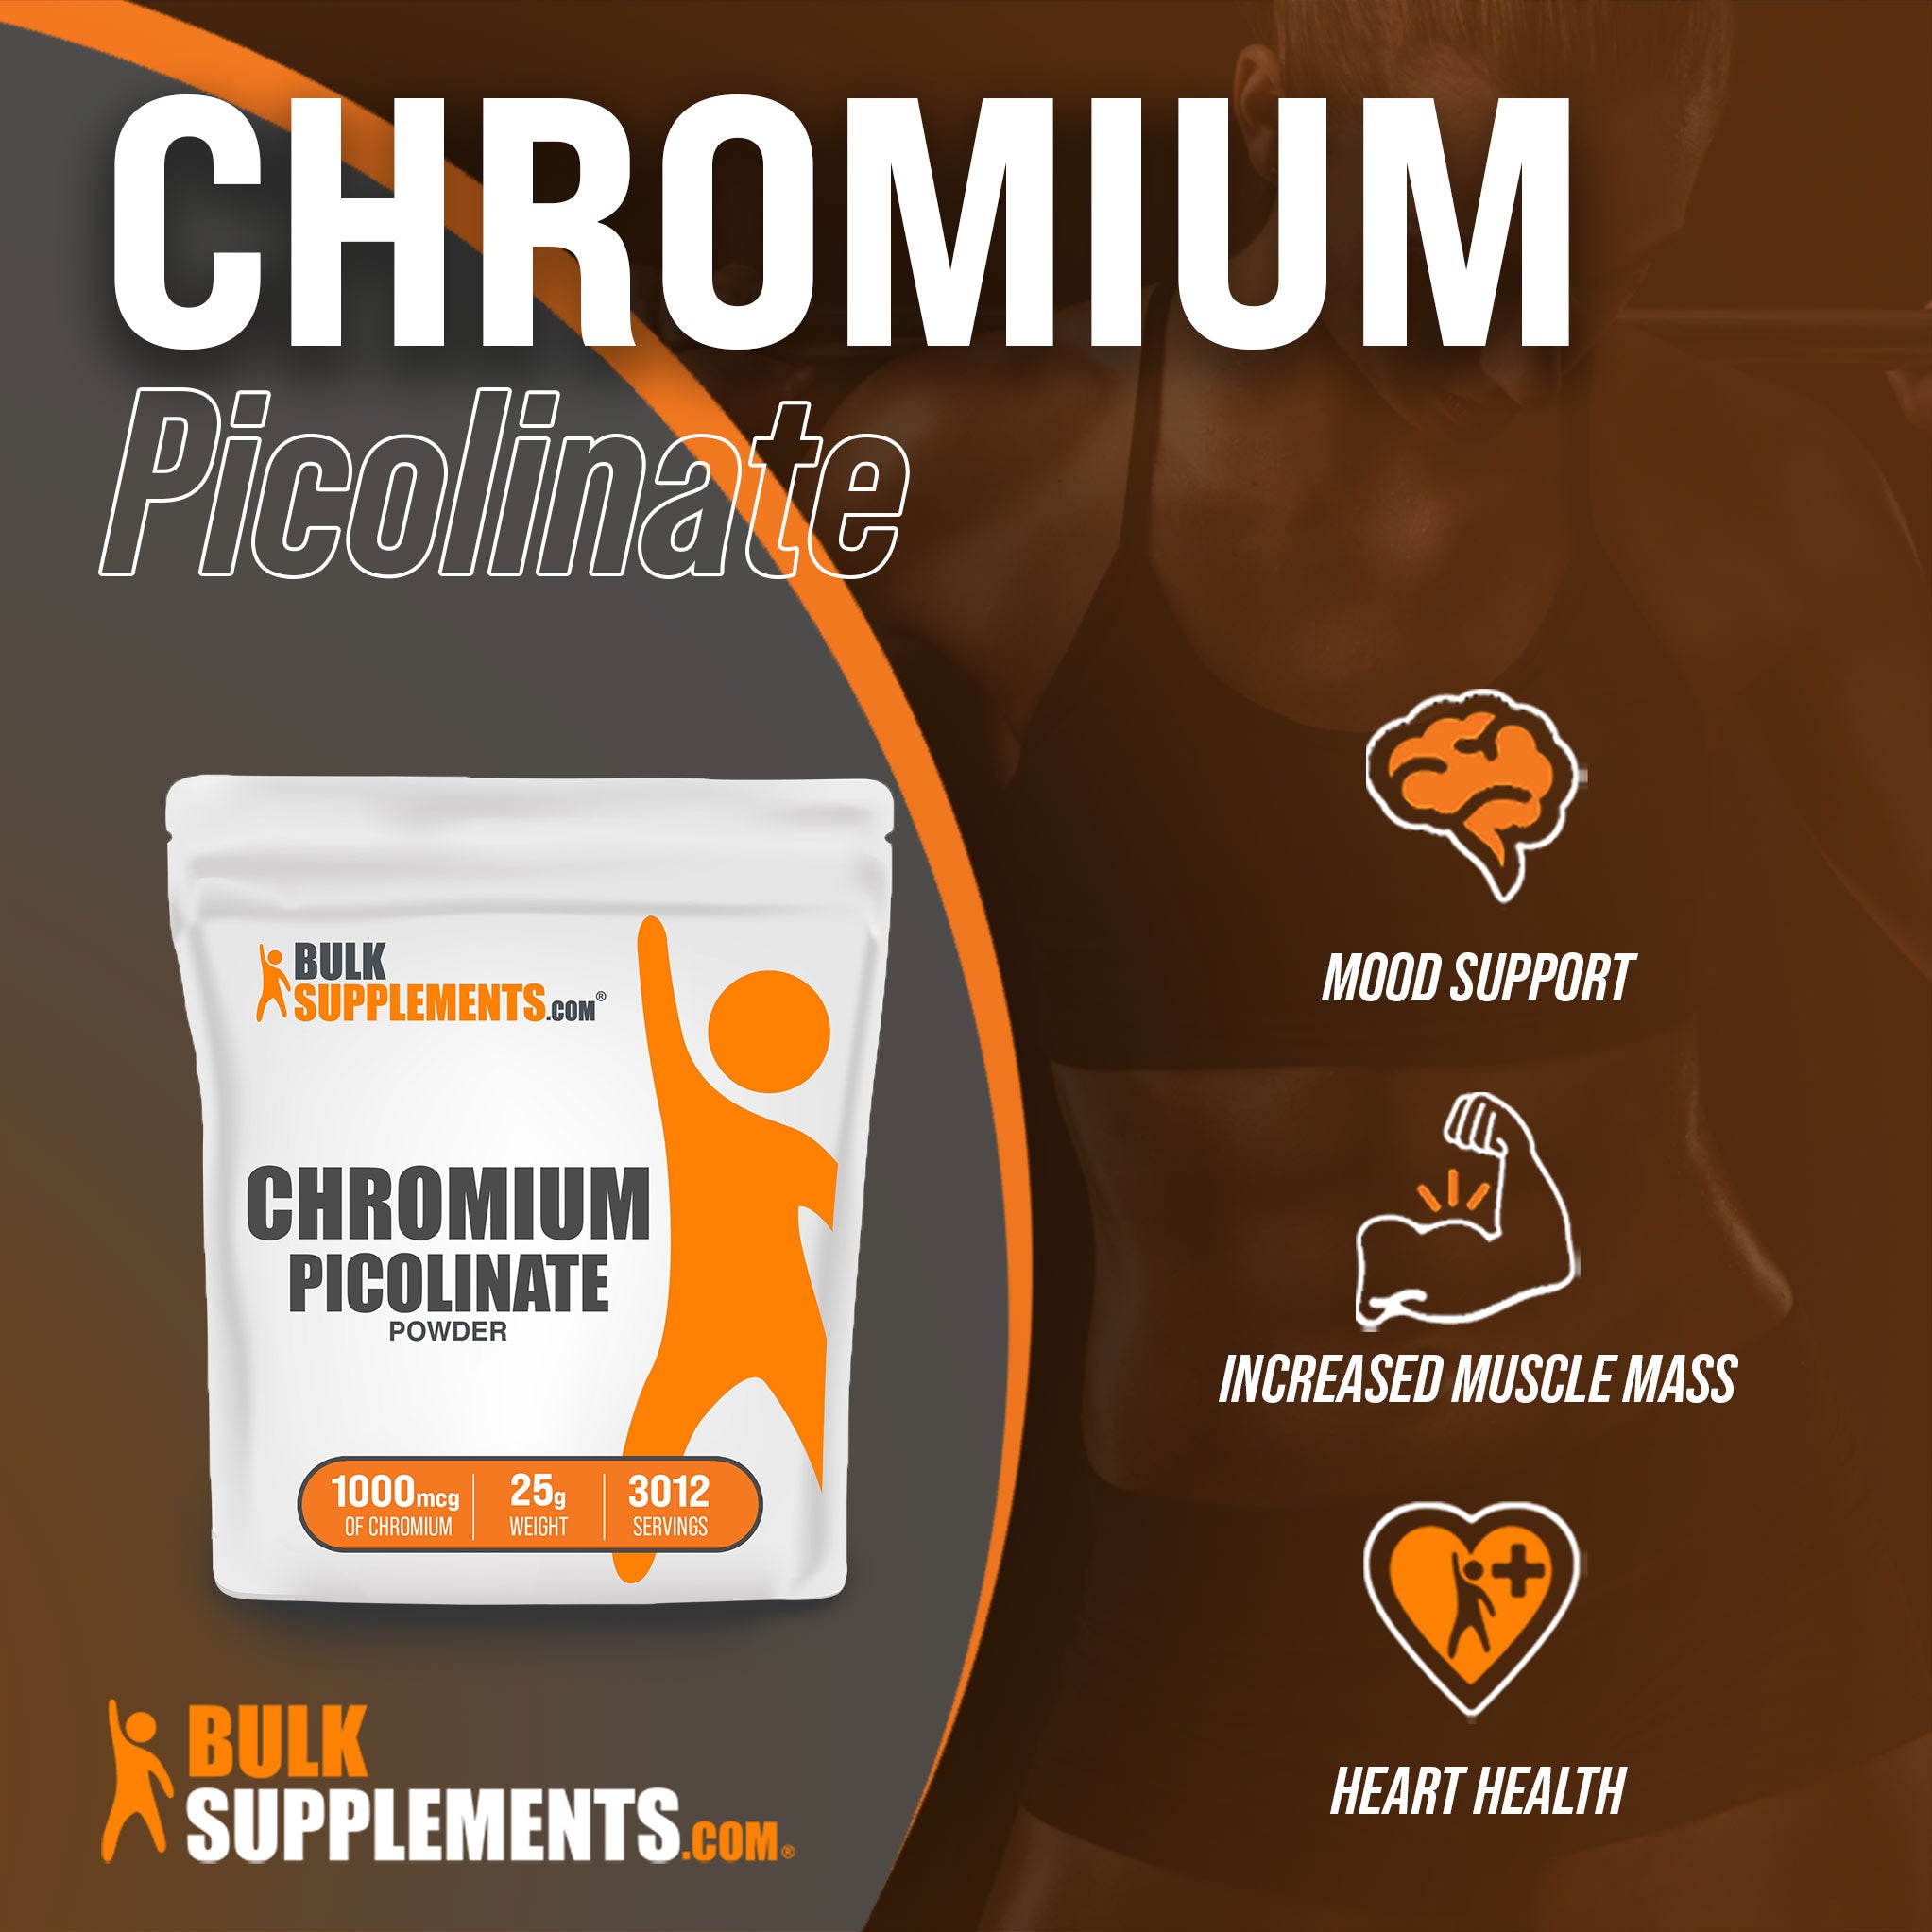 25g of chromium picolinate 1000mcg for weight loss, mood support and more